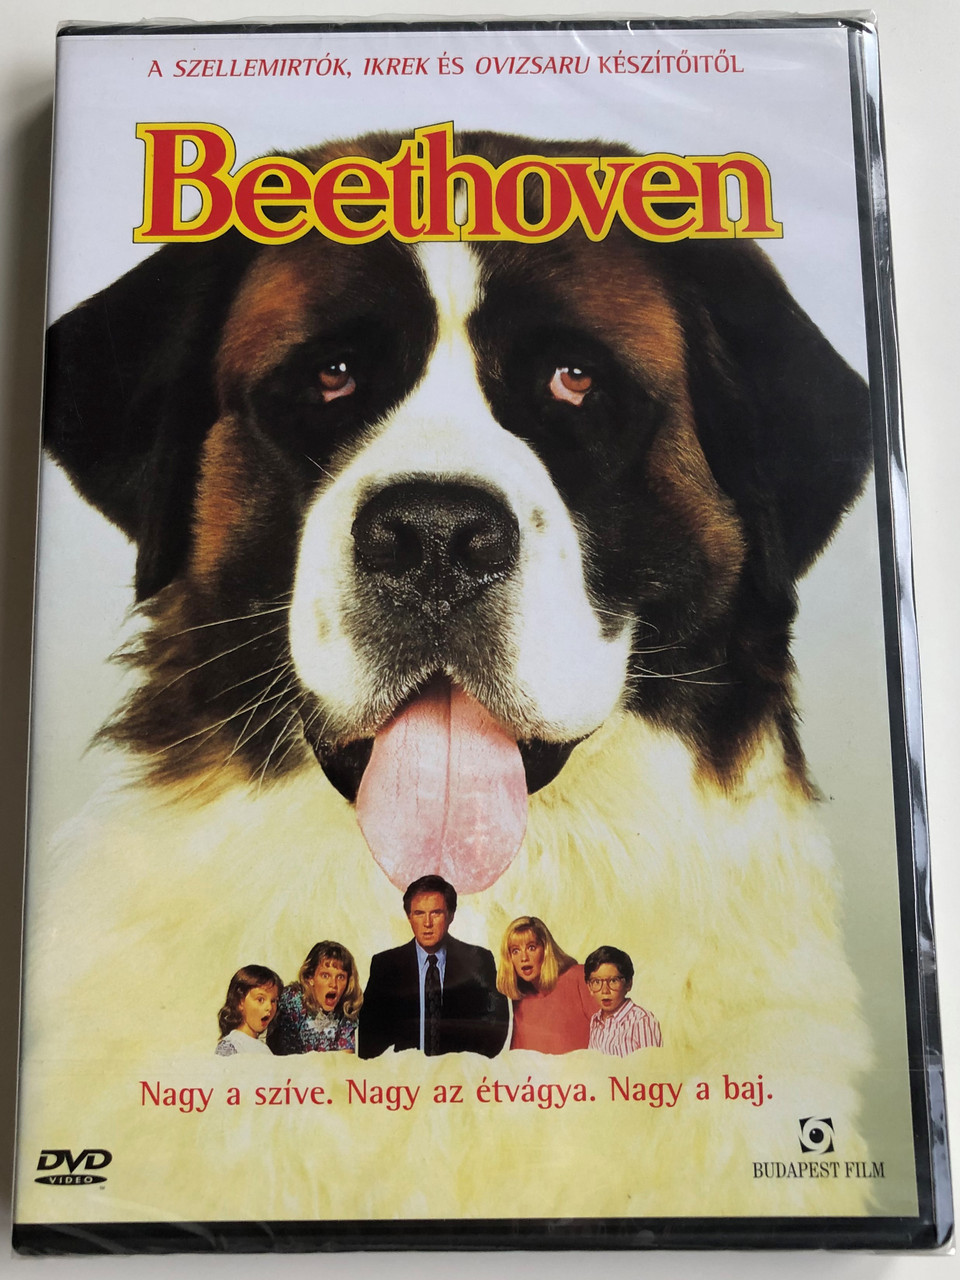 Beethoven DVD 1992 Beethoven / Directed by Brian Levant / Starring: Charles  Grodin, Bonnie Hunt, Dean Jones - bibleinmylanguage